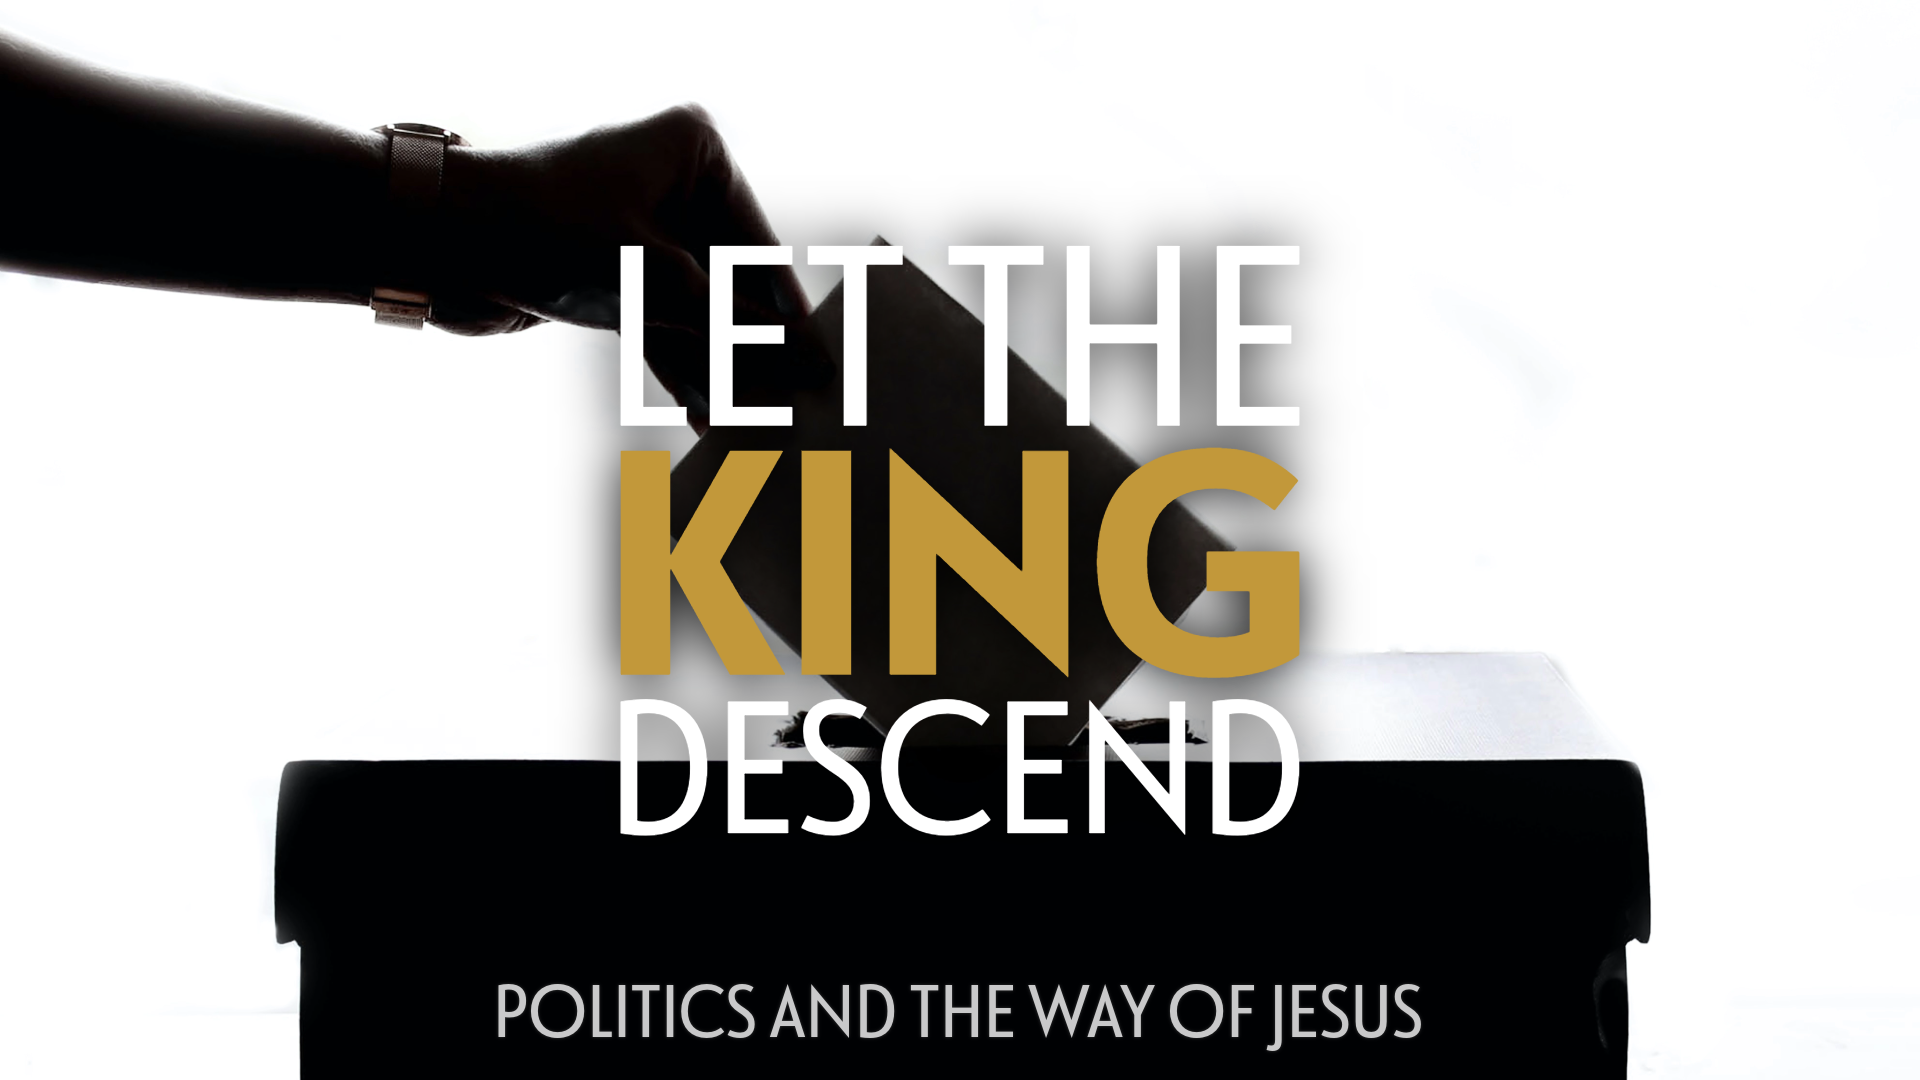 Let The King Descend: The Church and Politics